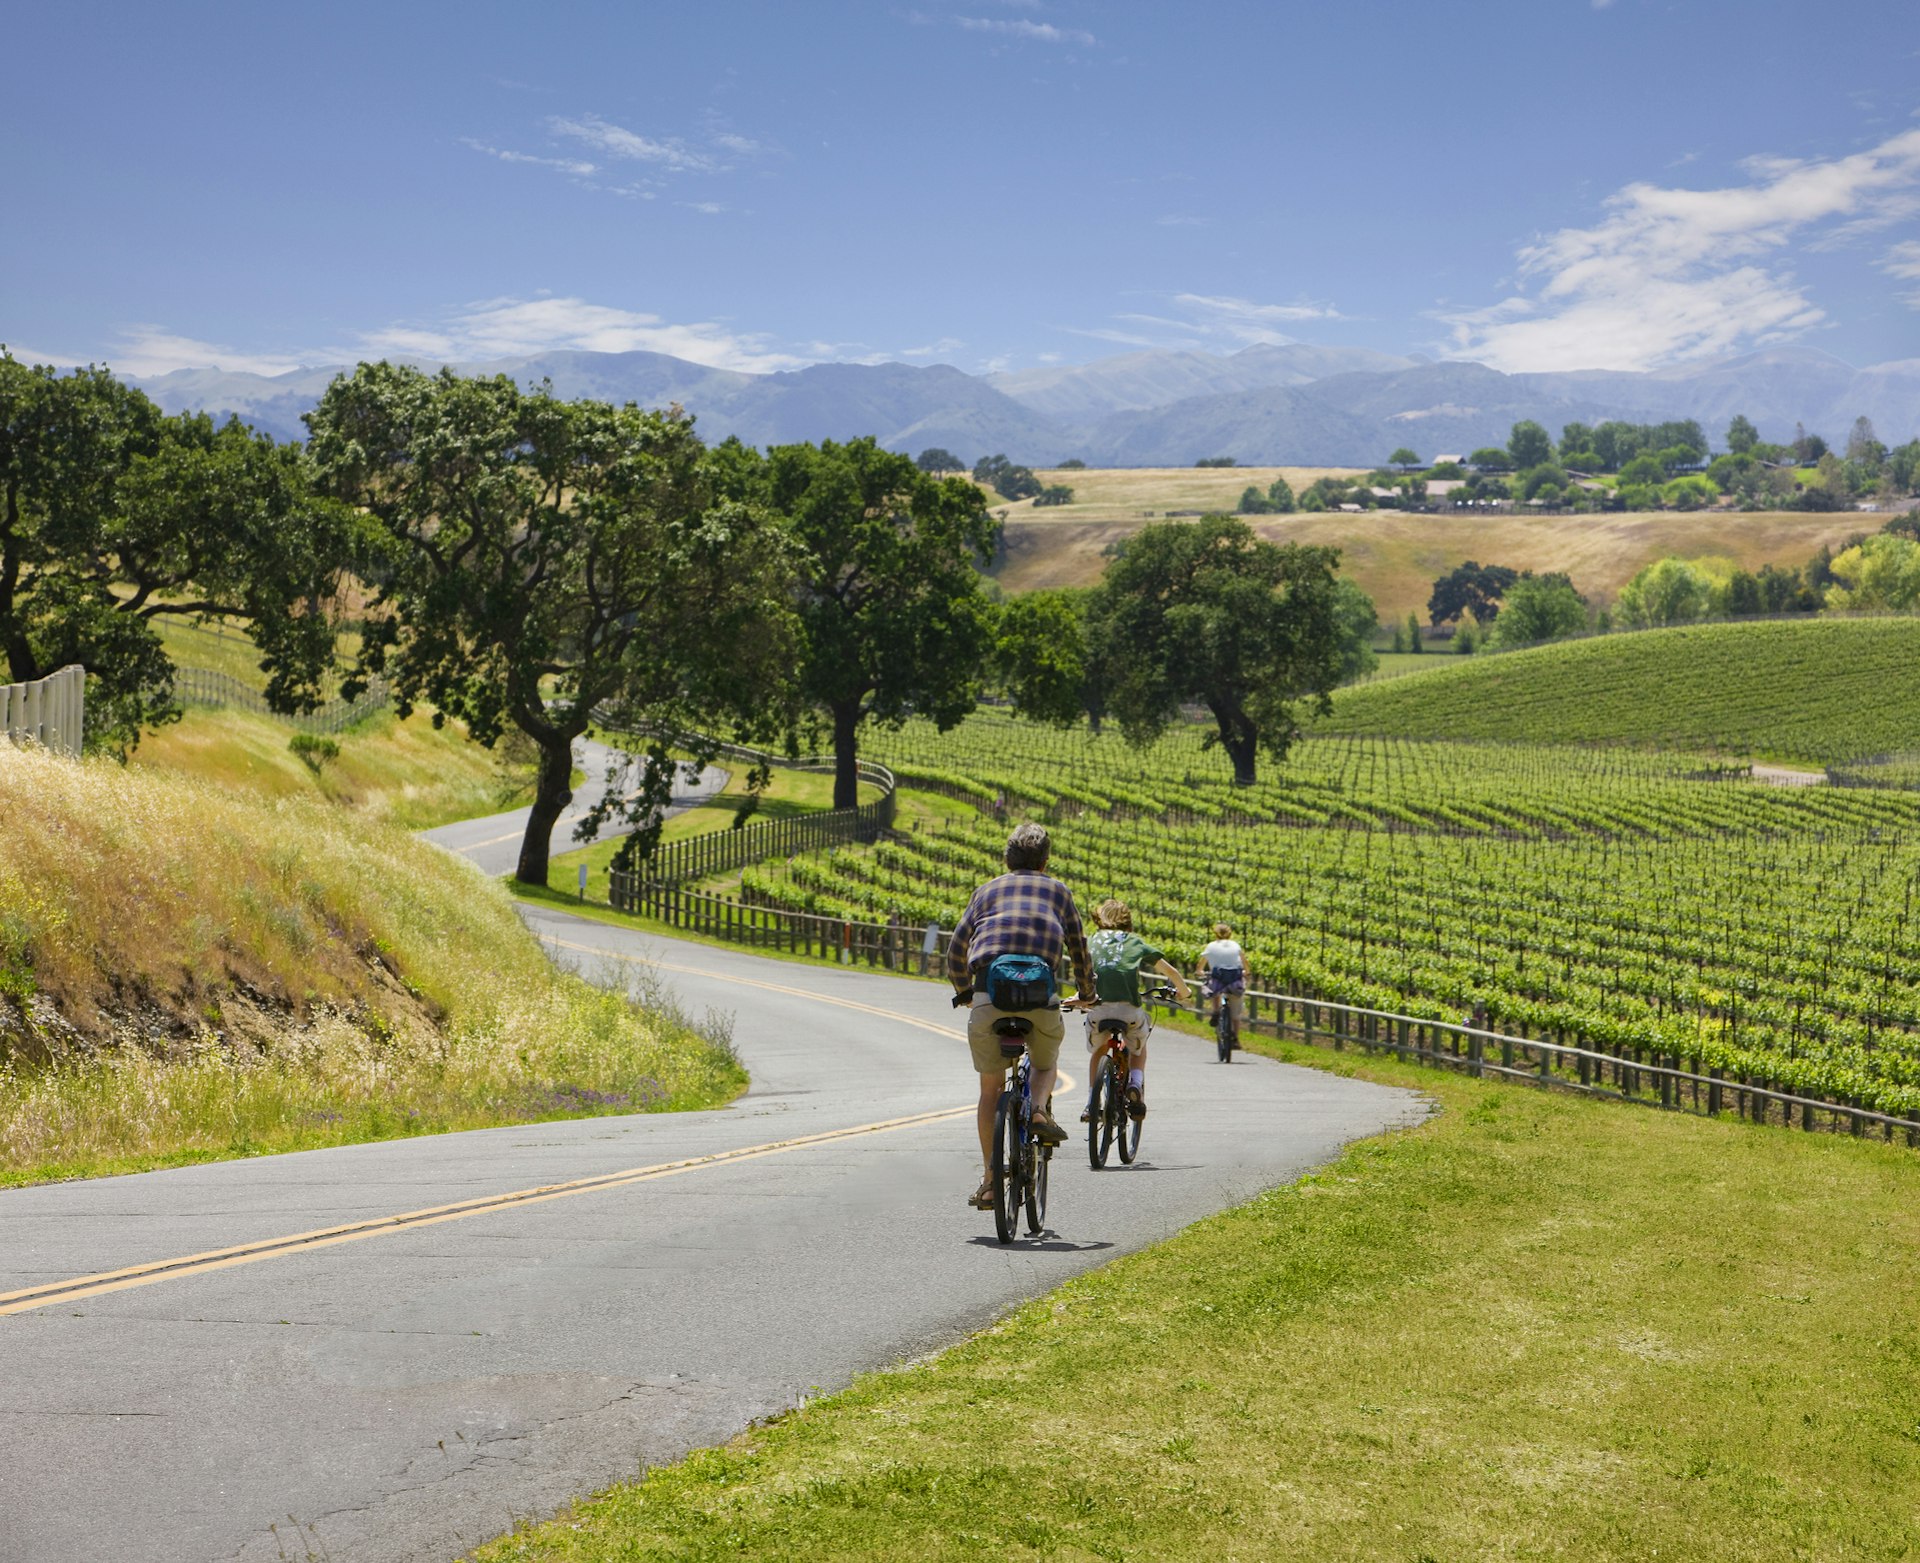 A family of bikers in the rolling hills east of Santa Barbara, California